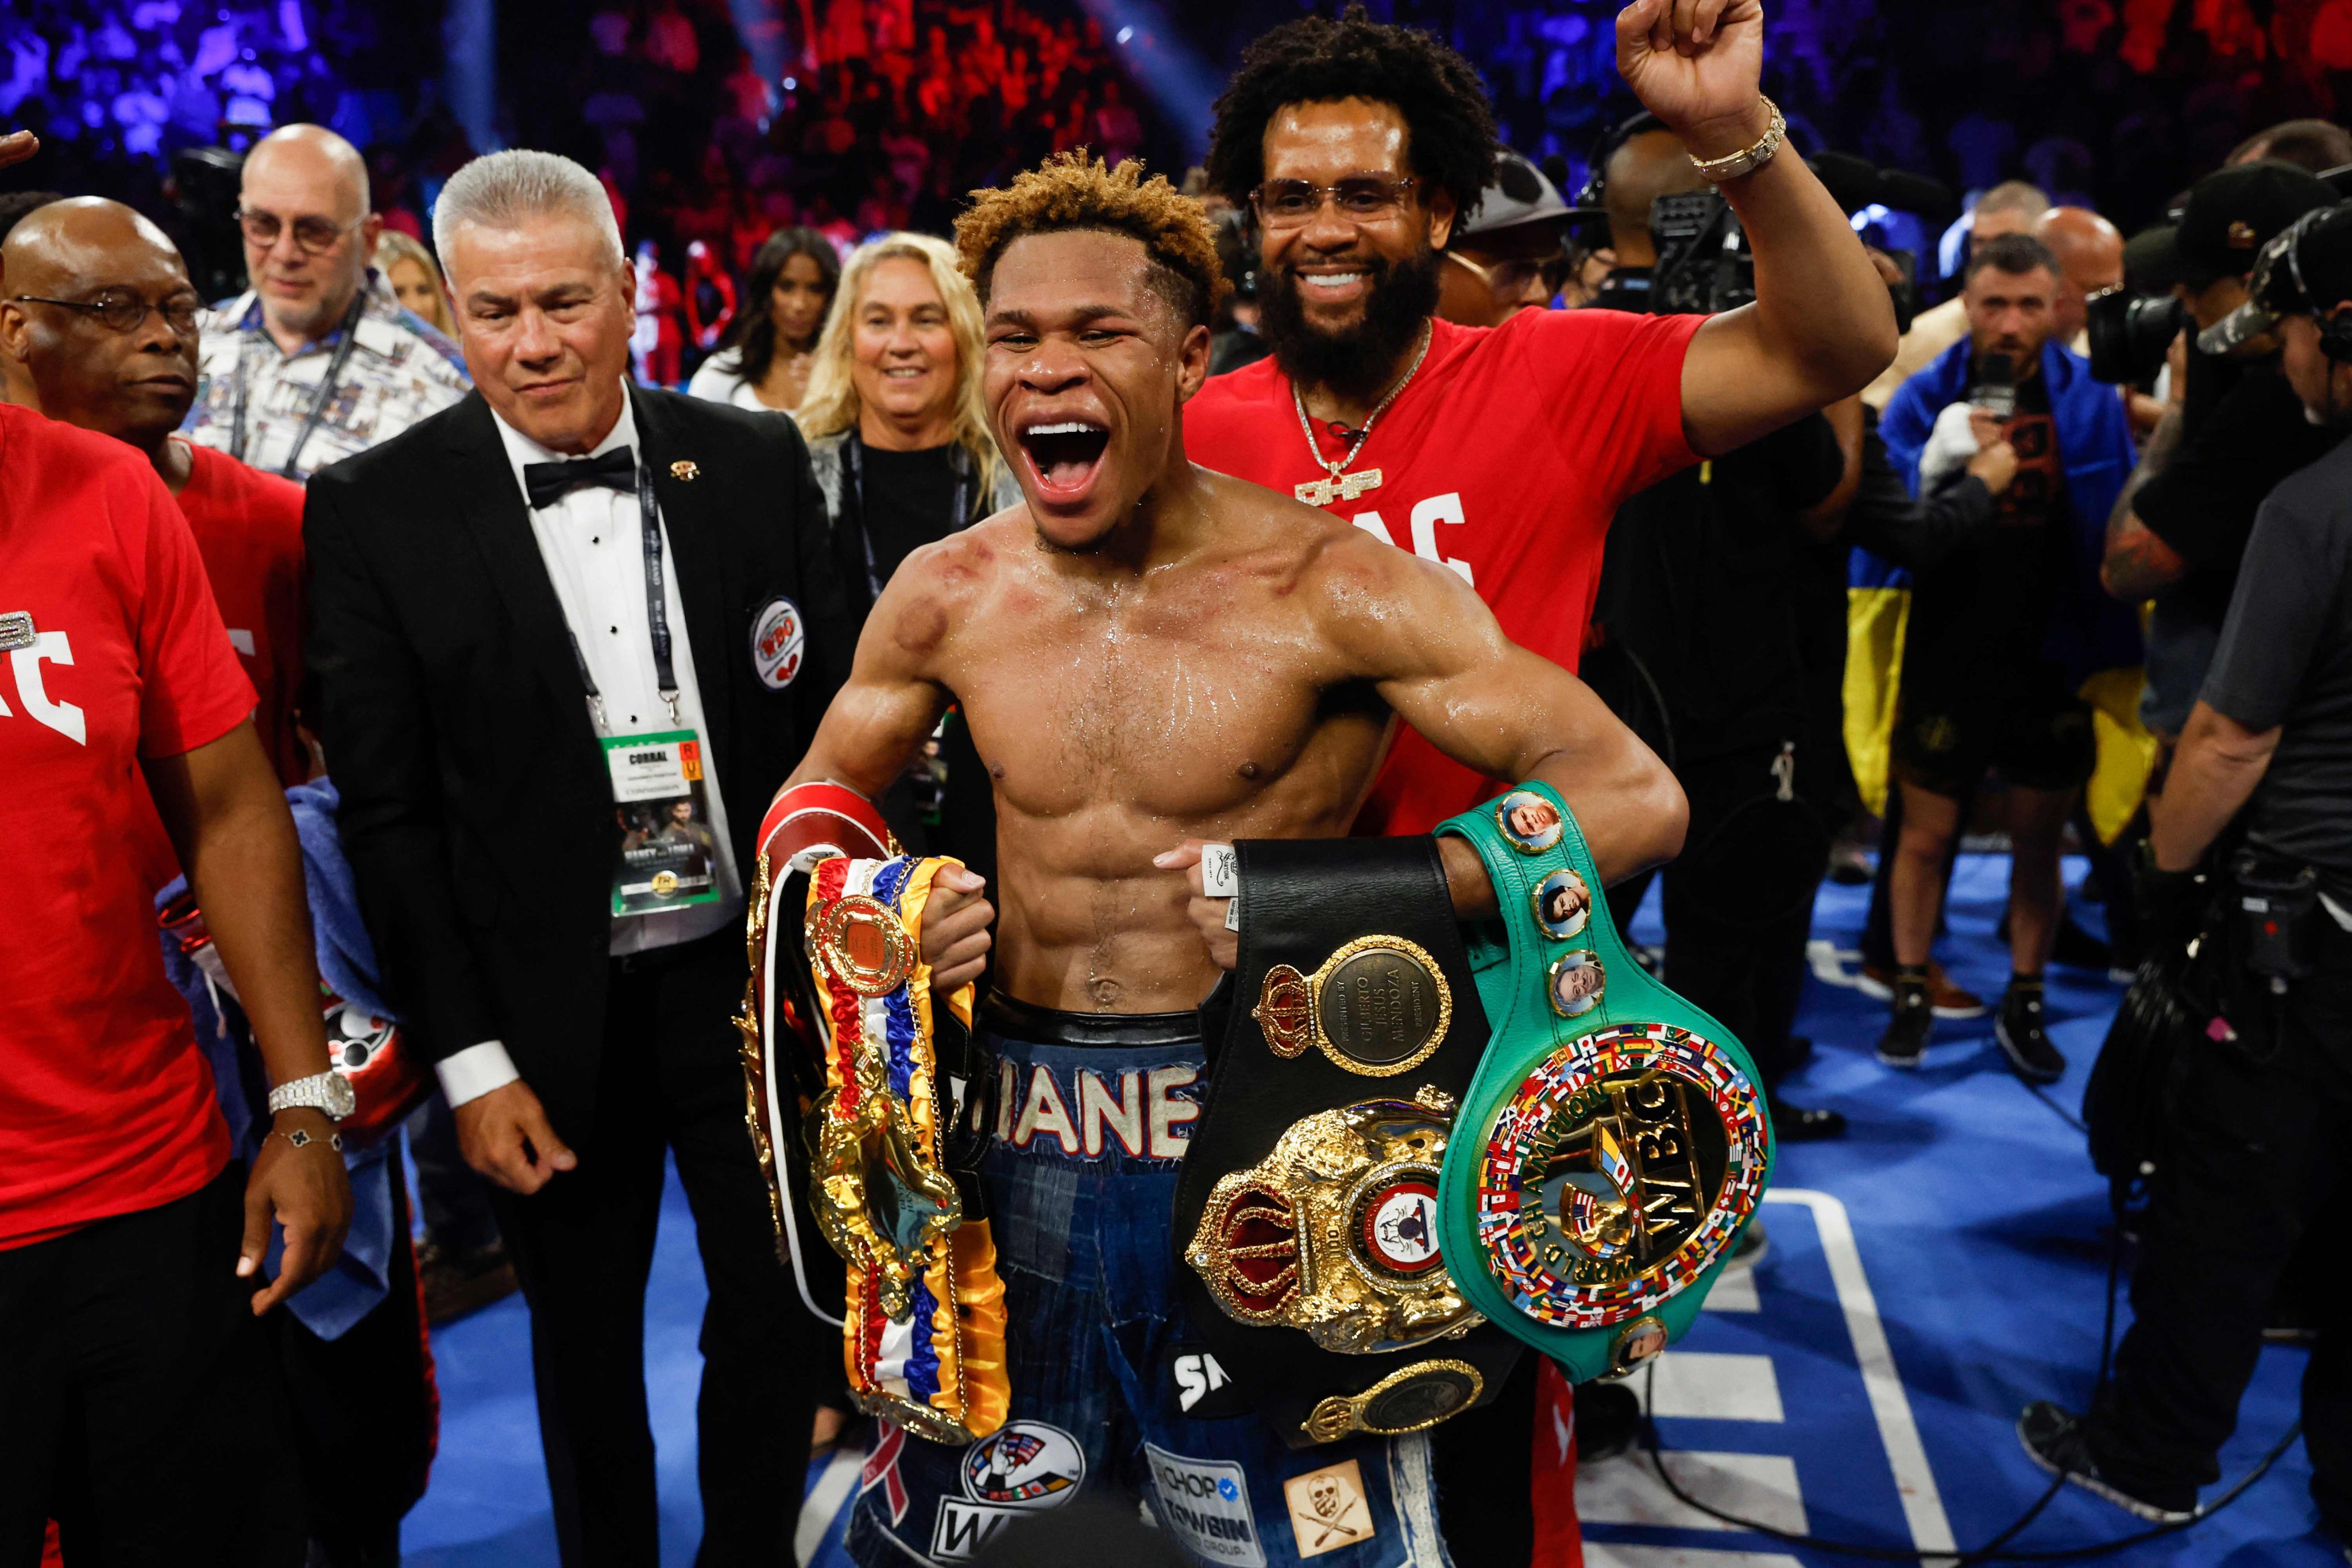 Devin Haney celebrates after defeating Vasiliy Lomachenko of Ukraine during their undisputed lightweight championship fight at MGM Grand Garden Arena on May 20, 2023 in Las Vegas, Nevada.   Photo: AFP